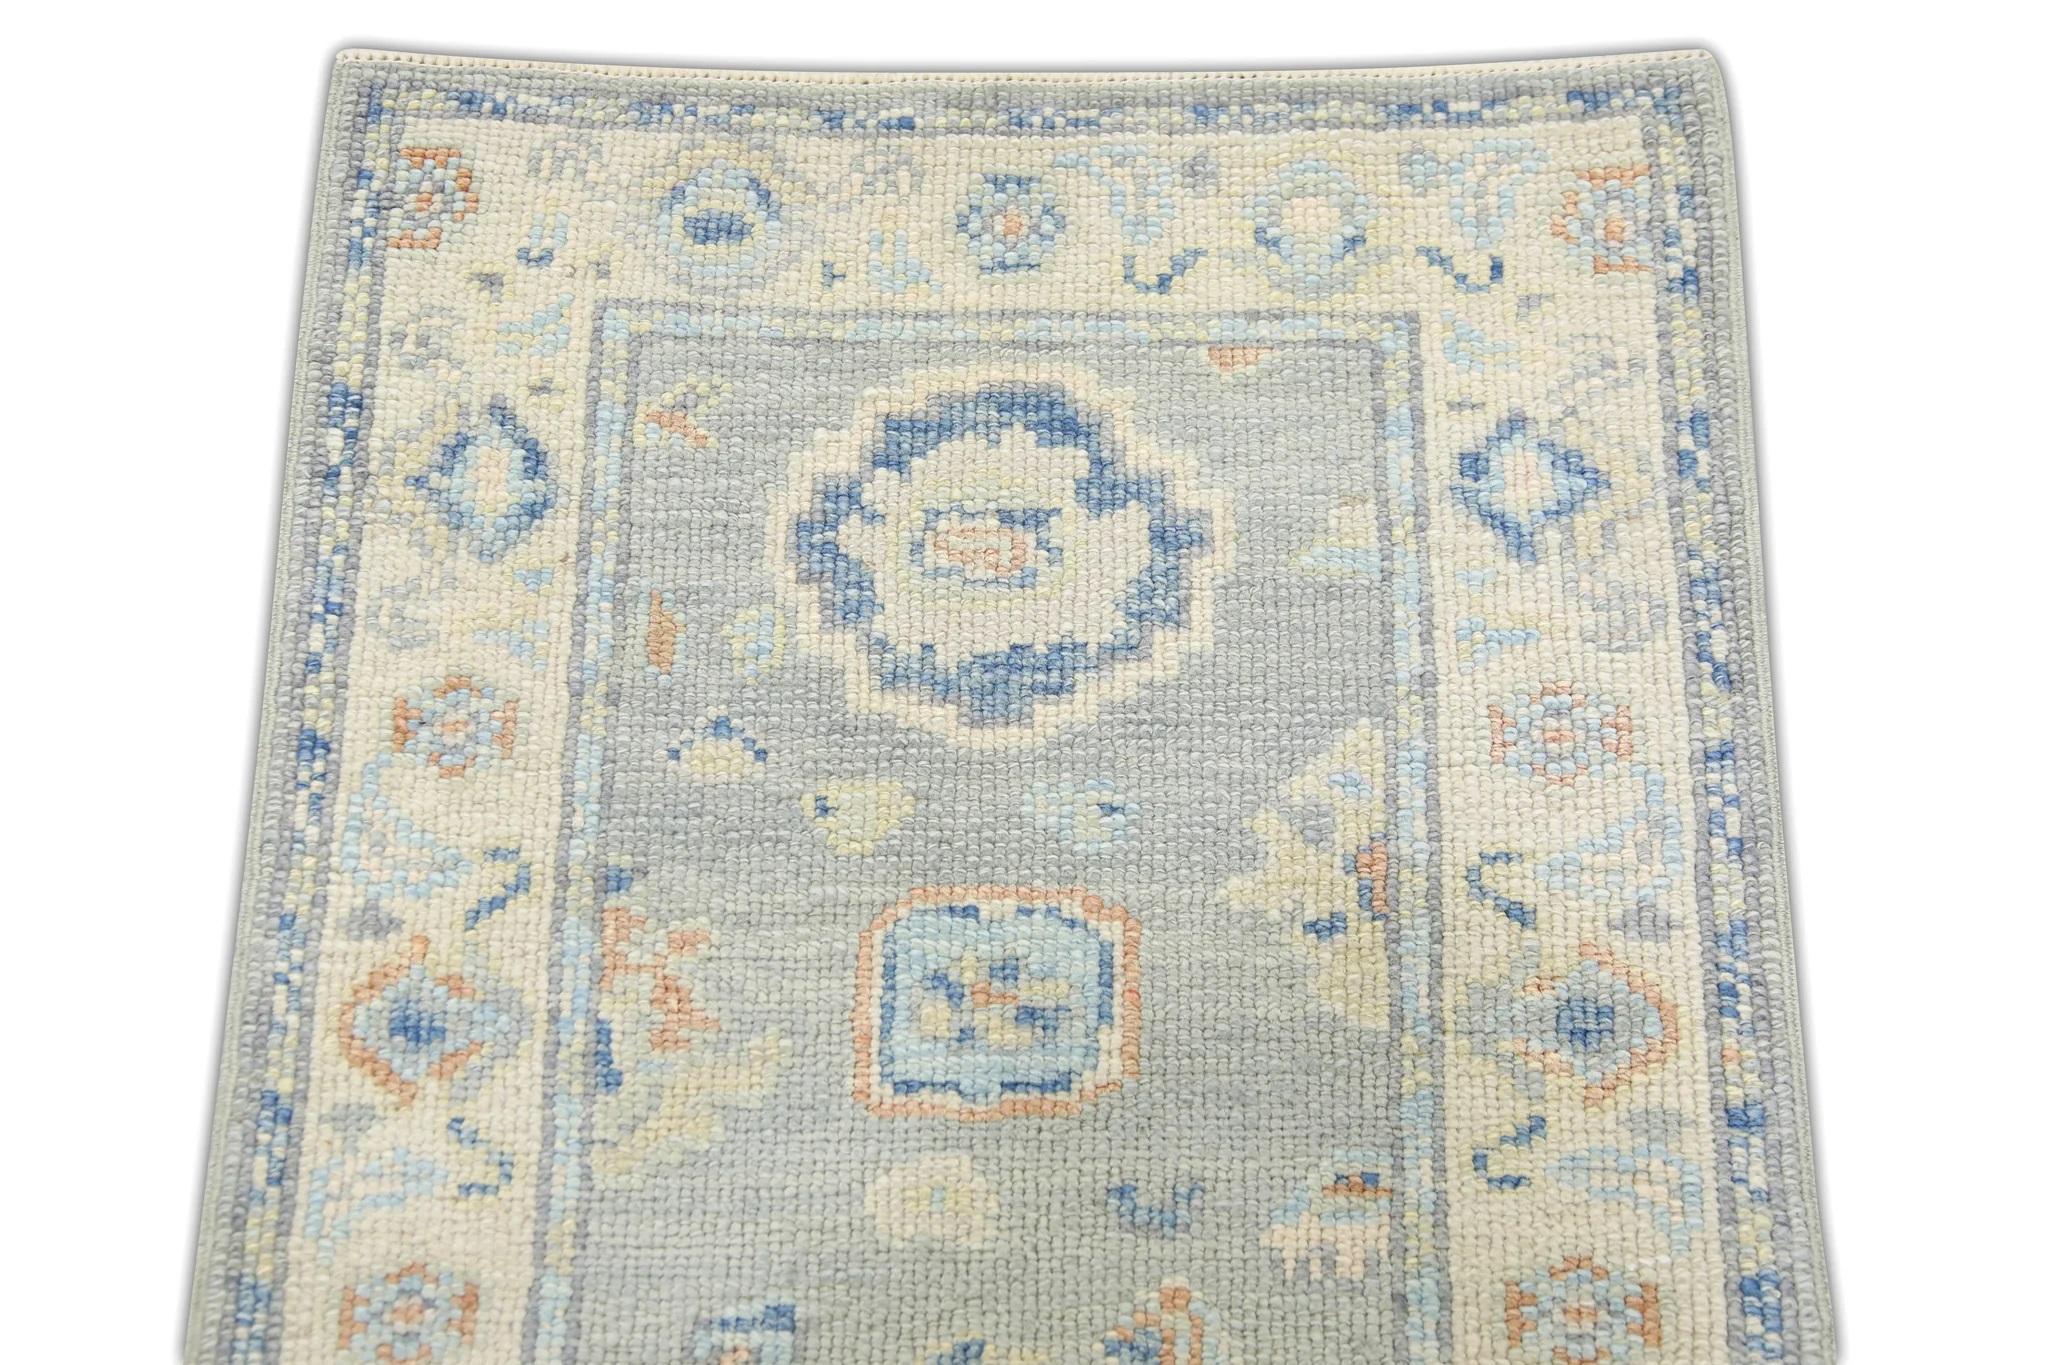 Vegetable Dyed Blue Handwoven Wool Turkish Oushak Rug in Salmon Floral Design 2'1